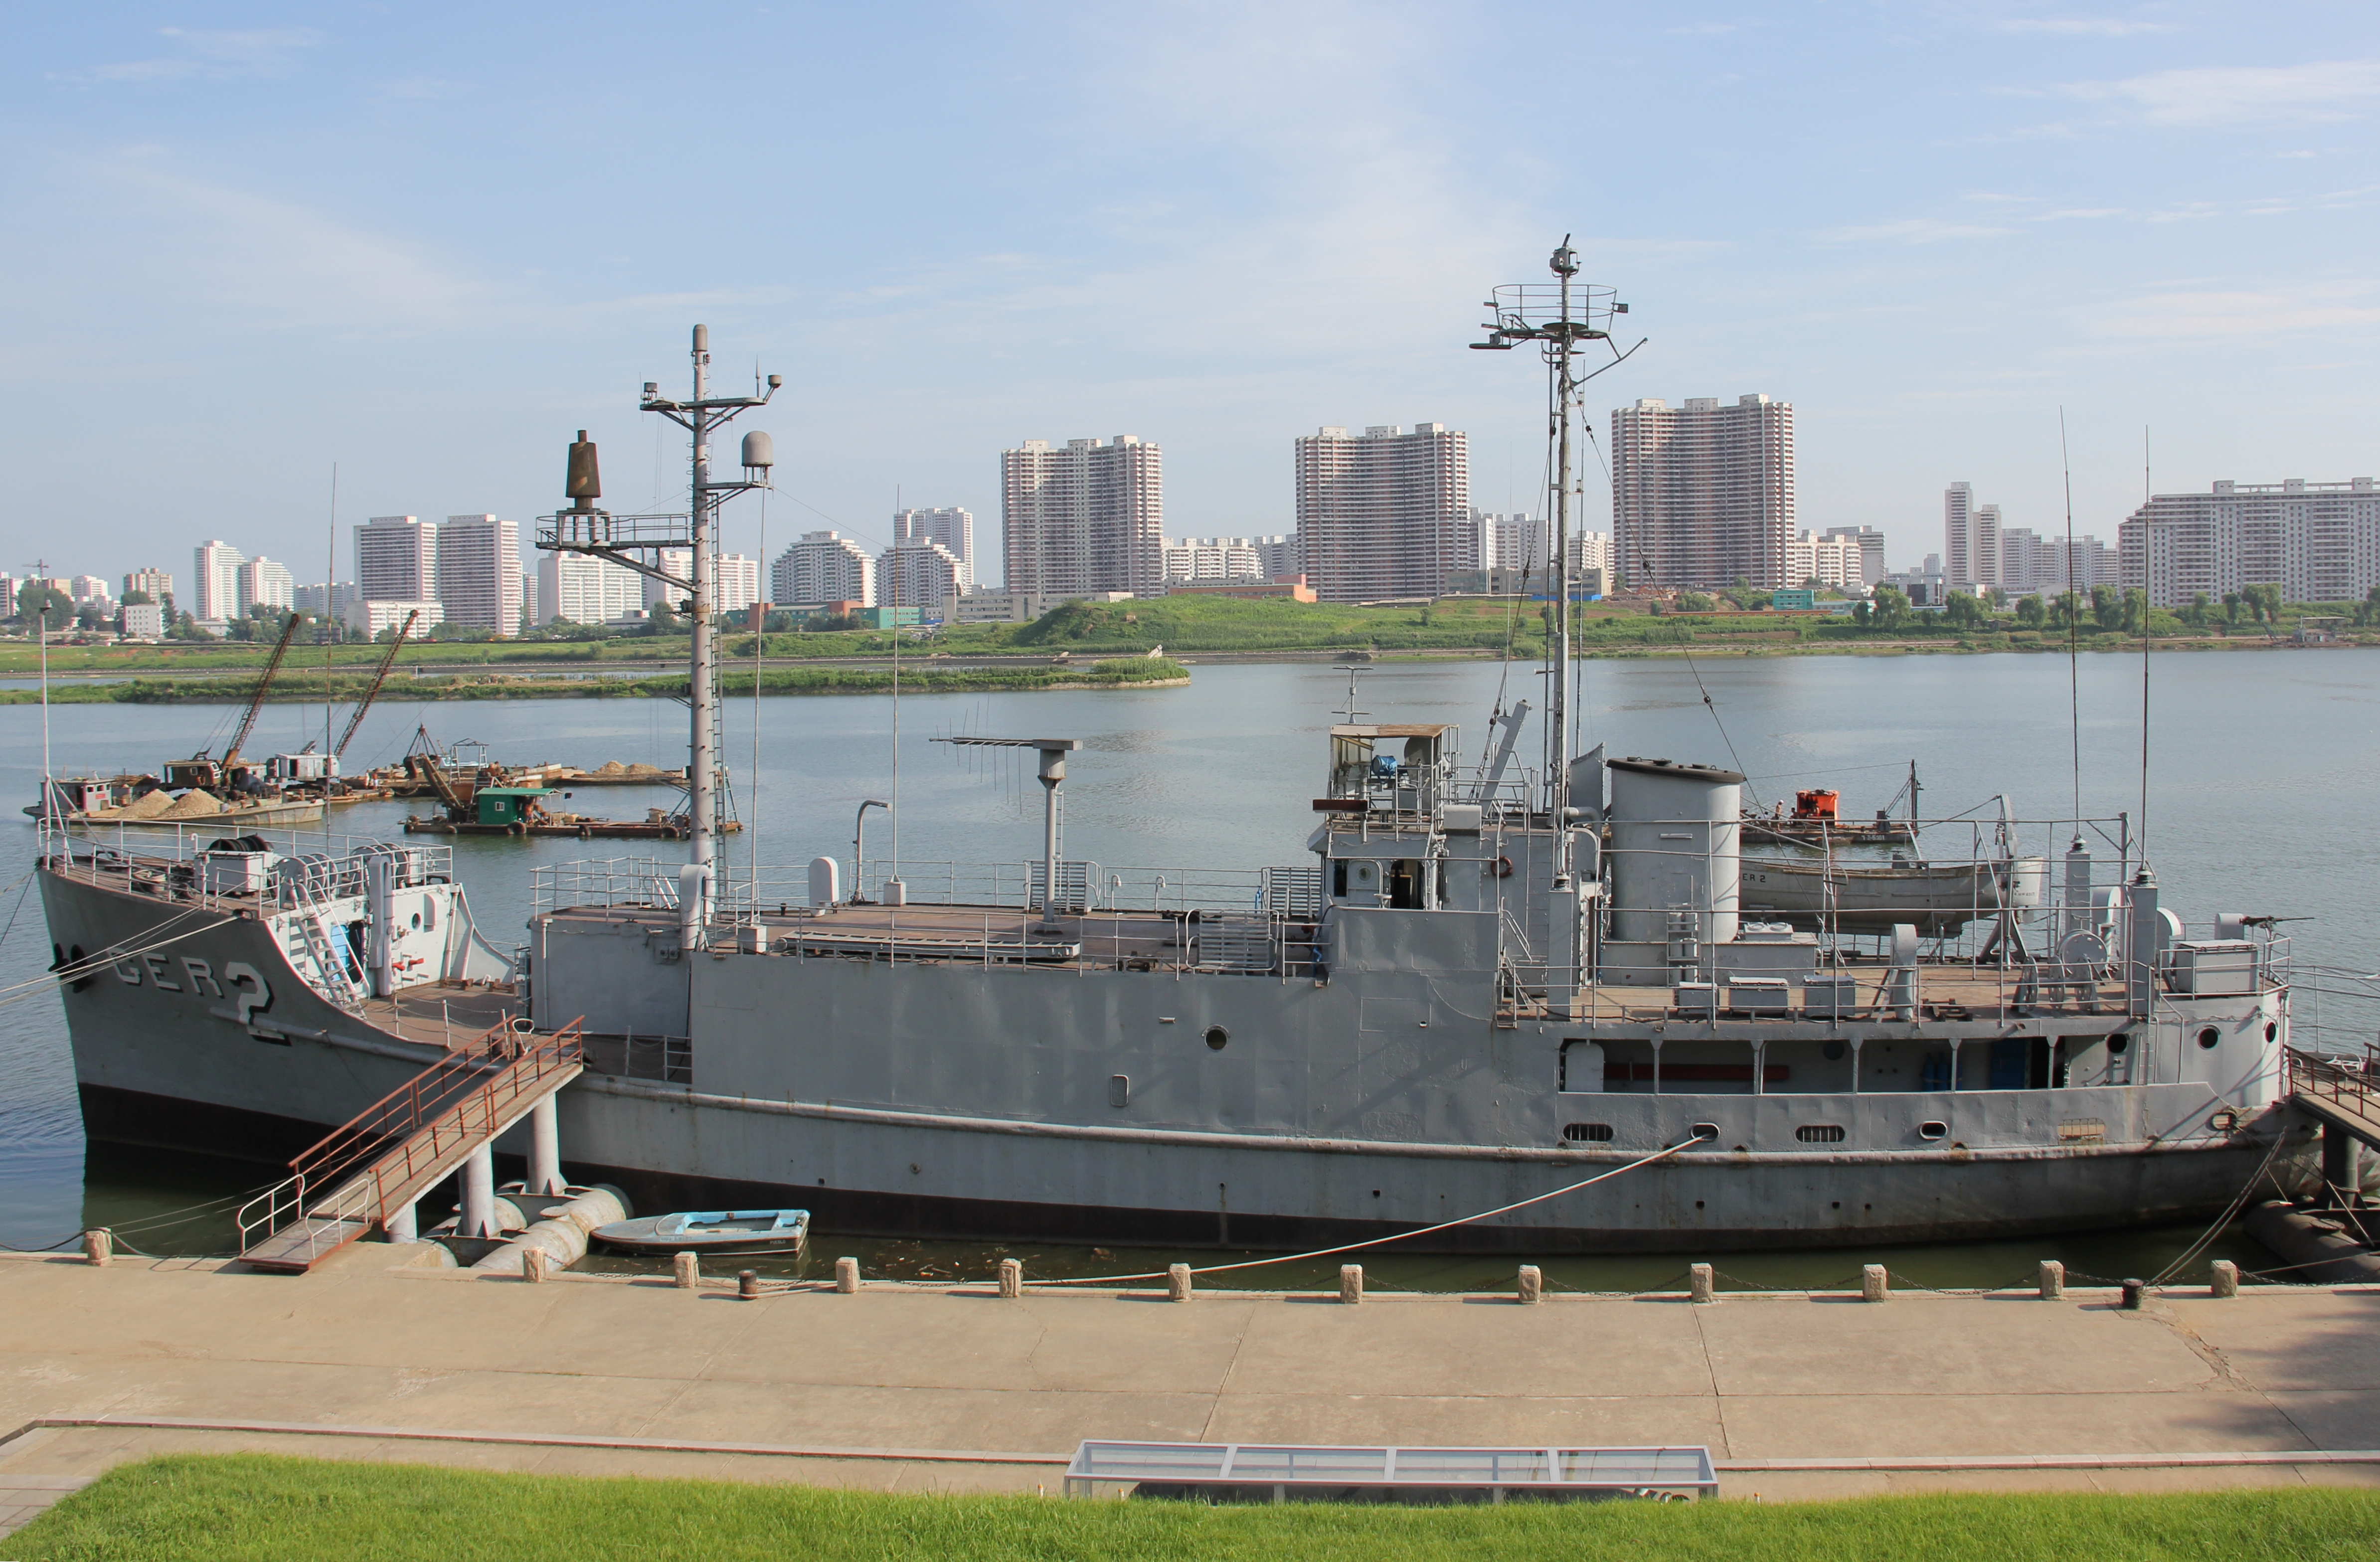 USS Pueblo remains in Pyongyang, North Korea, following her capture on January 23, 1968, and is currently the centerpiece of the Victorious Fatherland Liberation War Museum (조국해방전쟁승리기념관) spanning the Botong River. Photo taken on August 11, 2012.